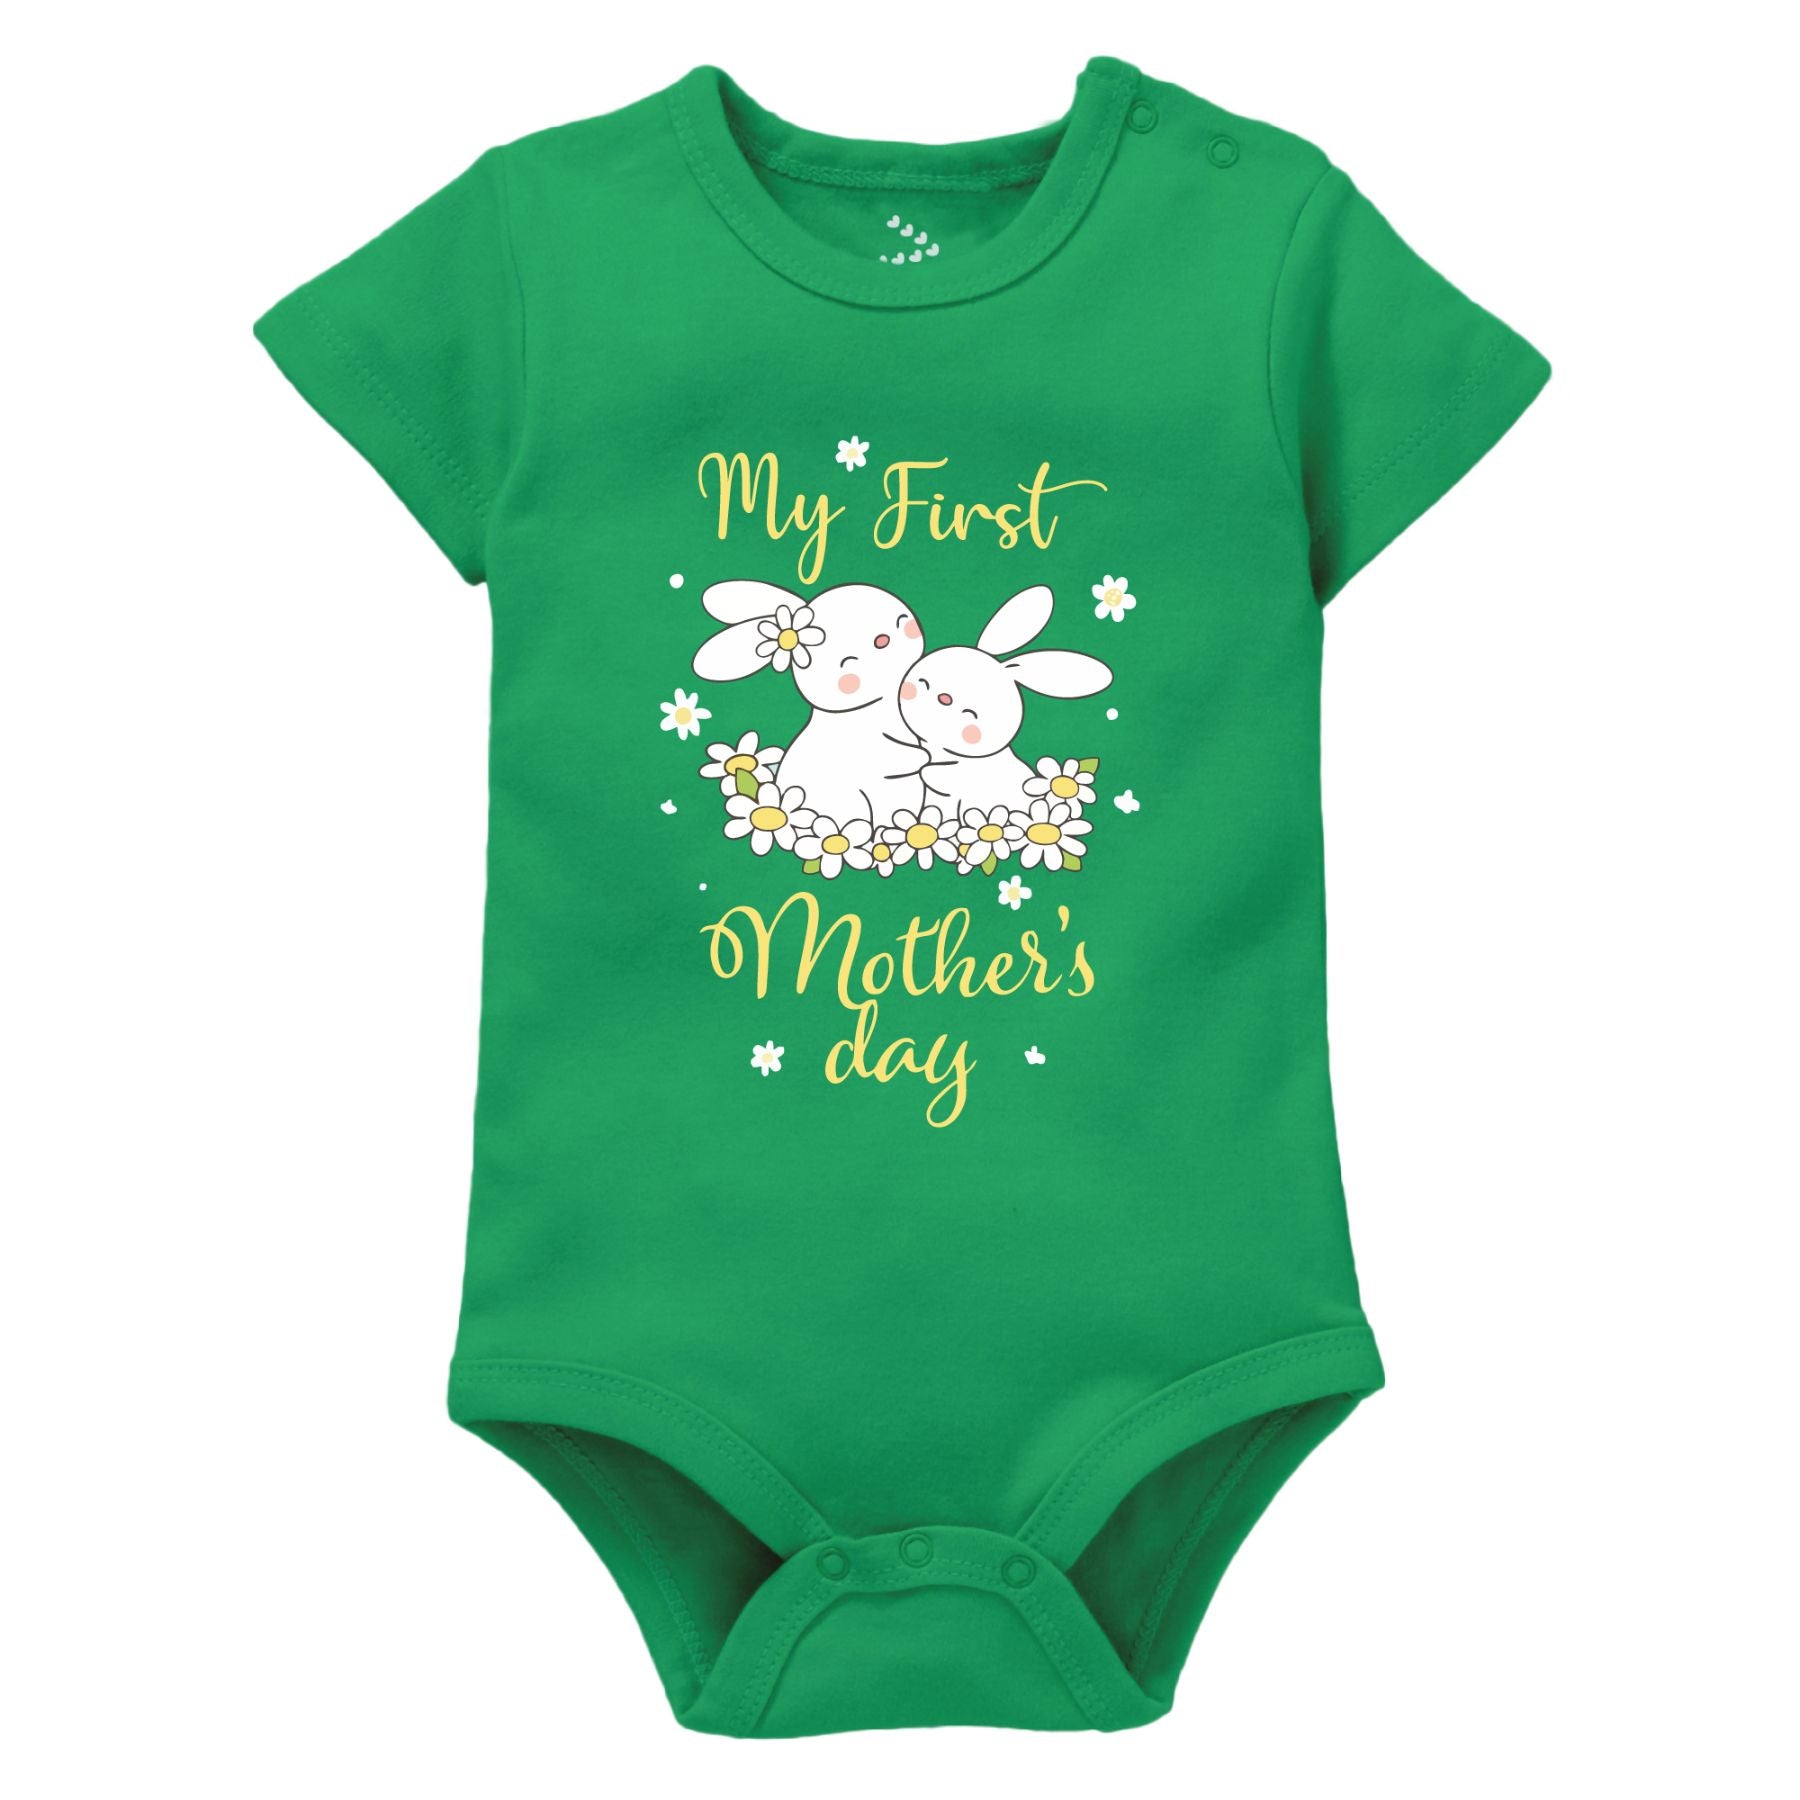 My First Mother's Day - Green